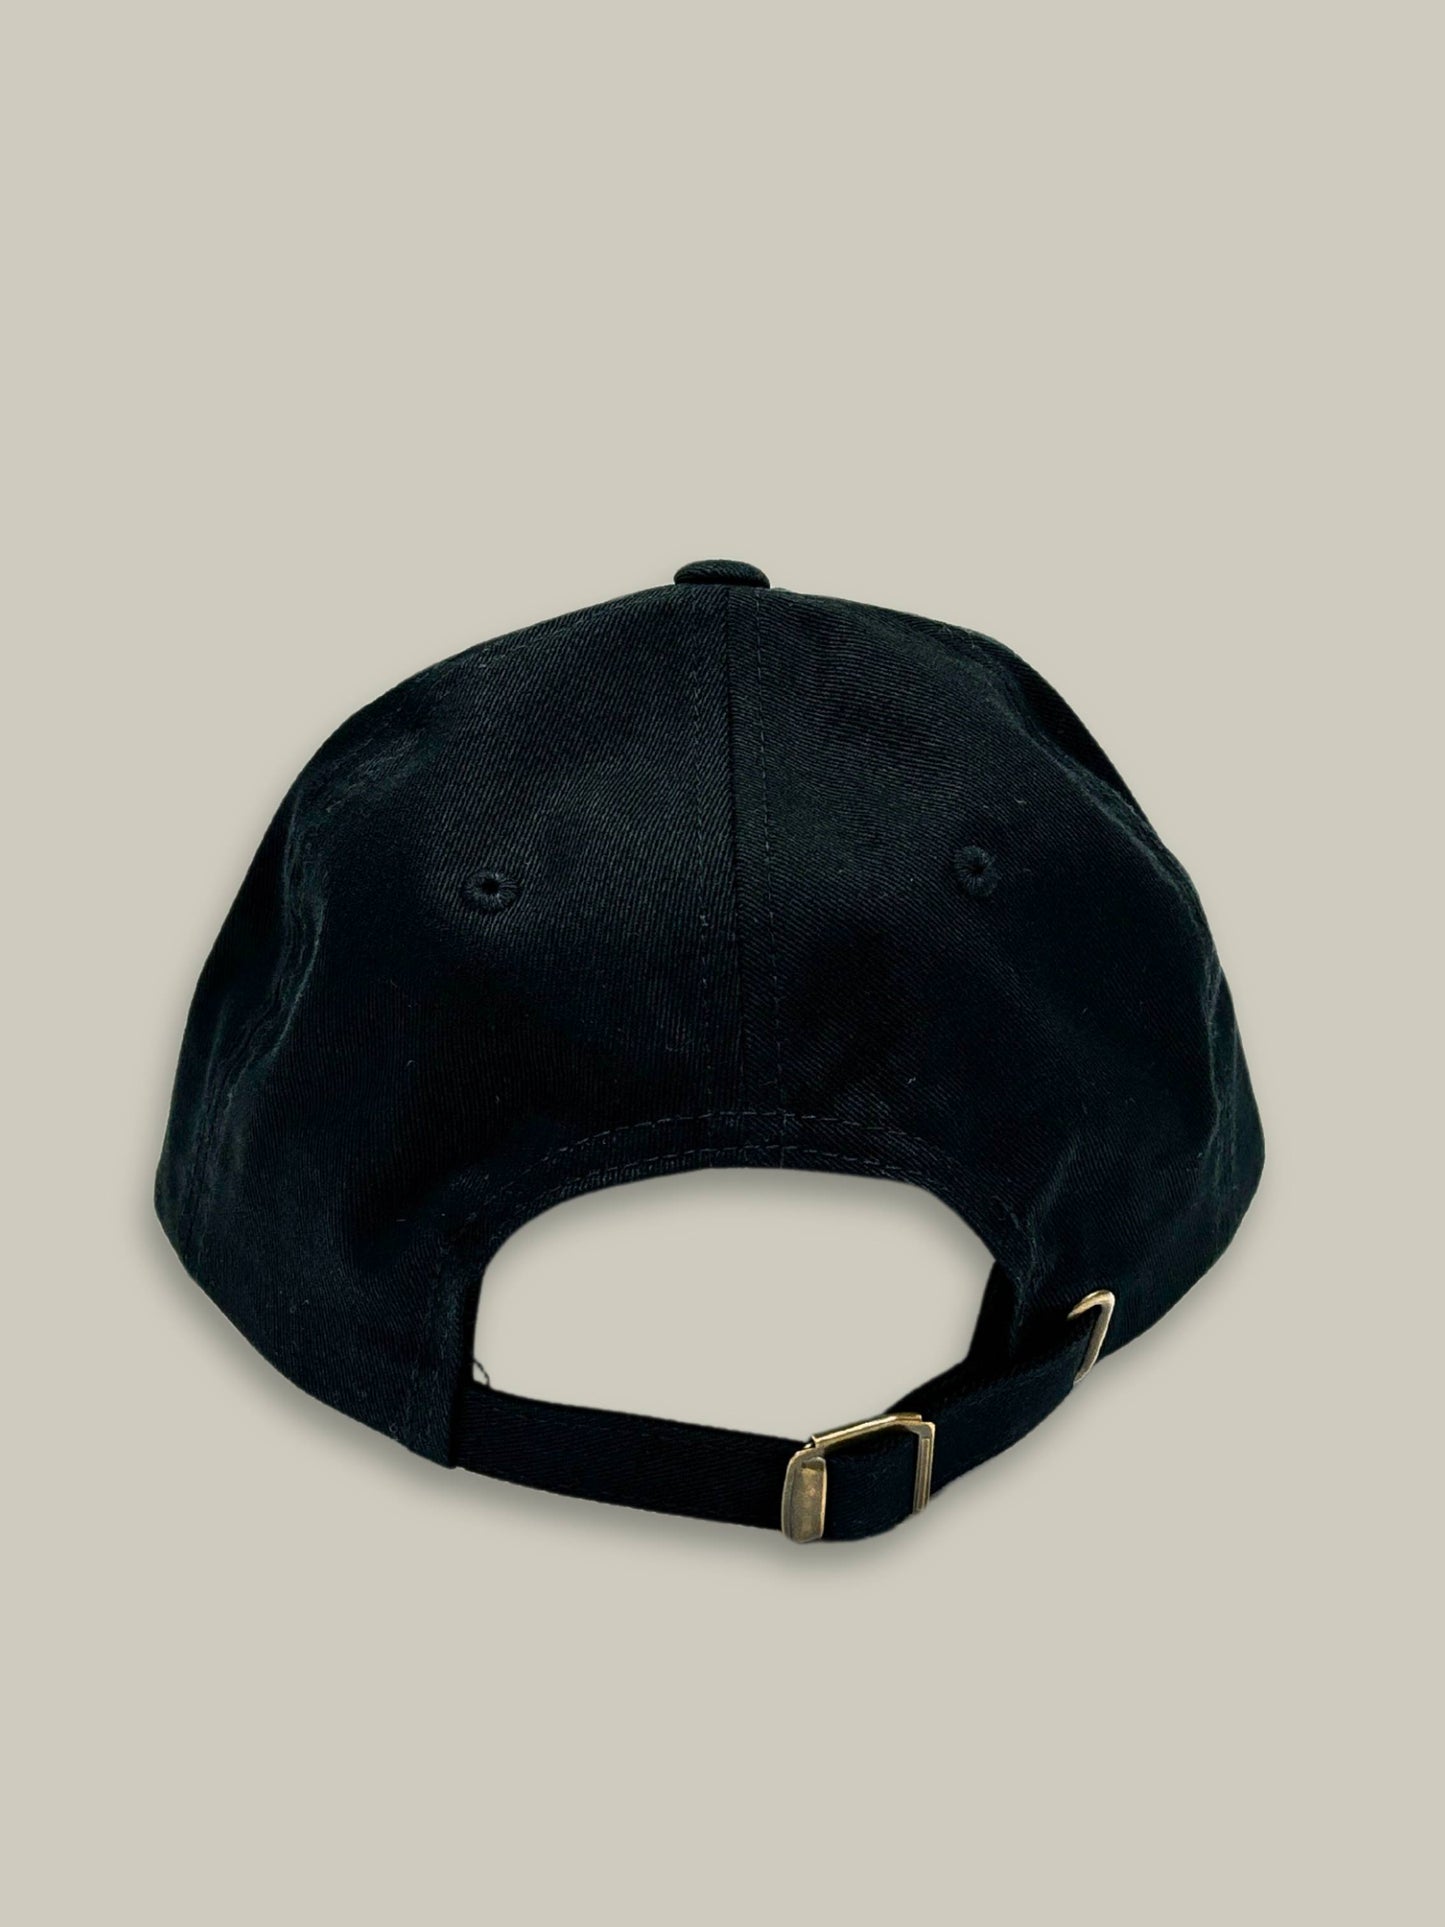 Back view of black GBSC Carve hat with brass clasp